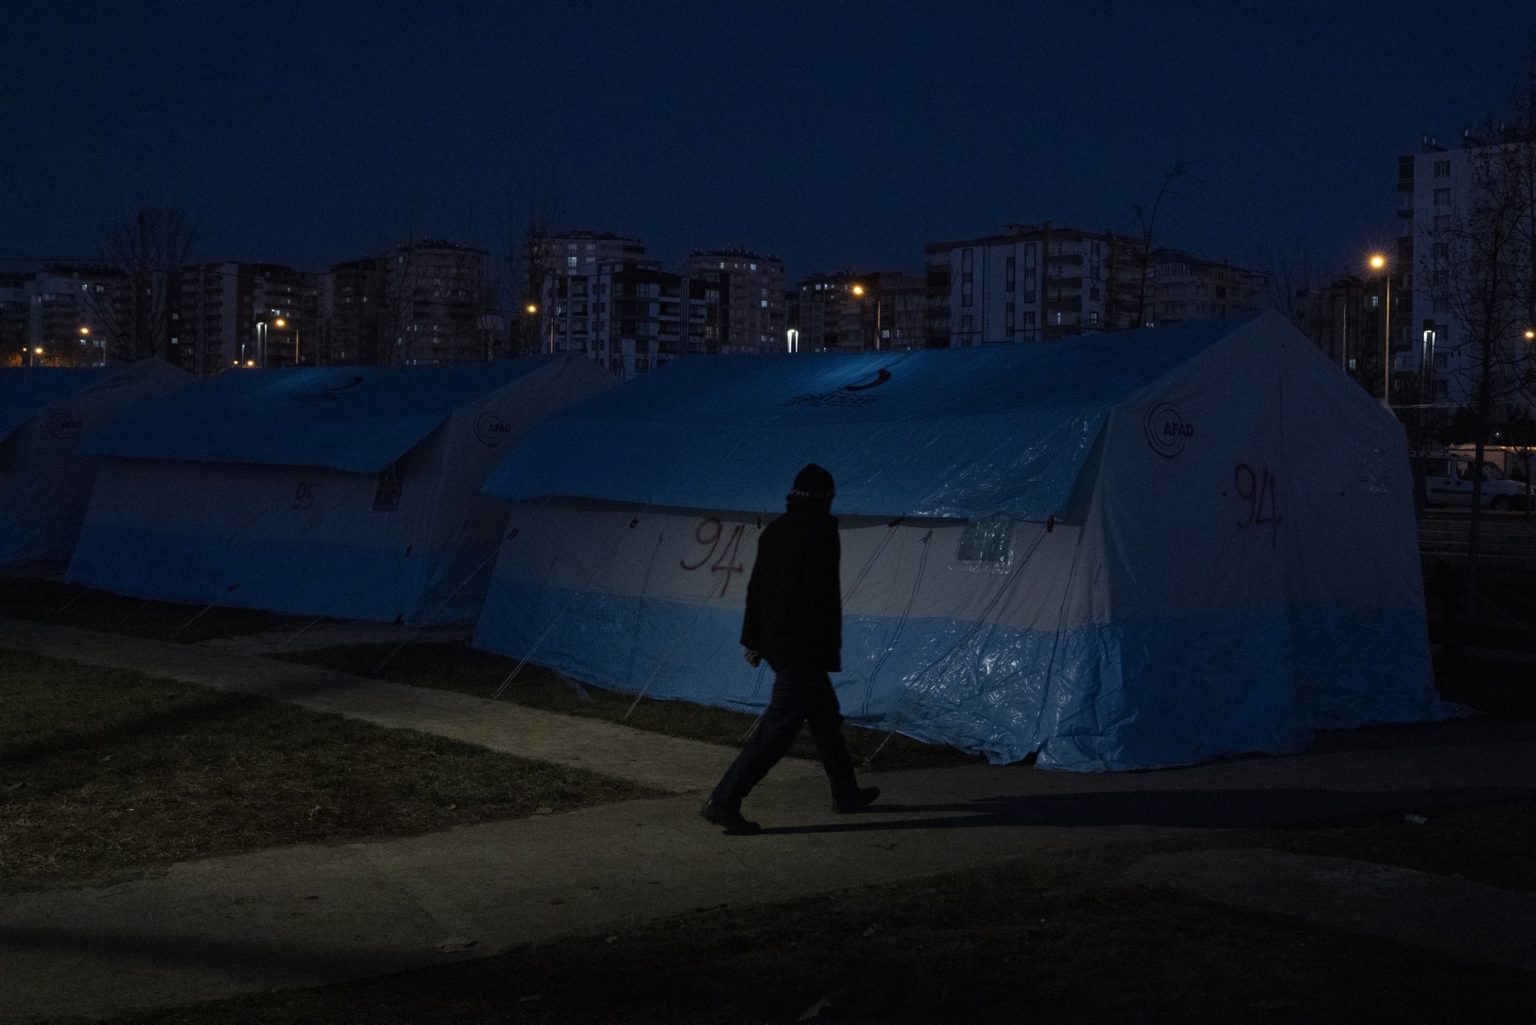 Diyarbakir, Turkey, February 2023 - The aftermath of the earthquake that hit southern Turkey and northern Syria. A man walks inside a tent camp set up in the city of Diyarbakir.><
Diyarbakir, Turchia, febbraio 2023  Le conseguenze del terremoto che ha colpito la Turchia del Sud e la Siria del nord.